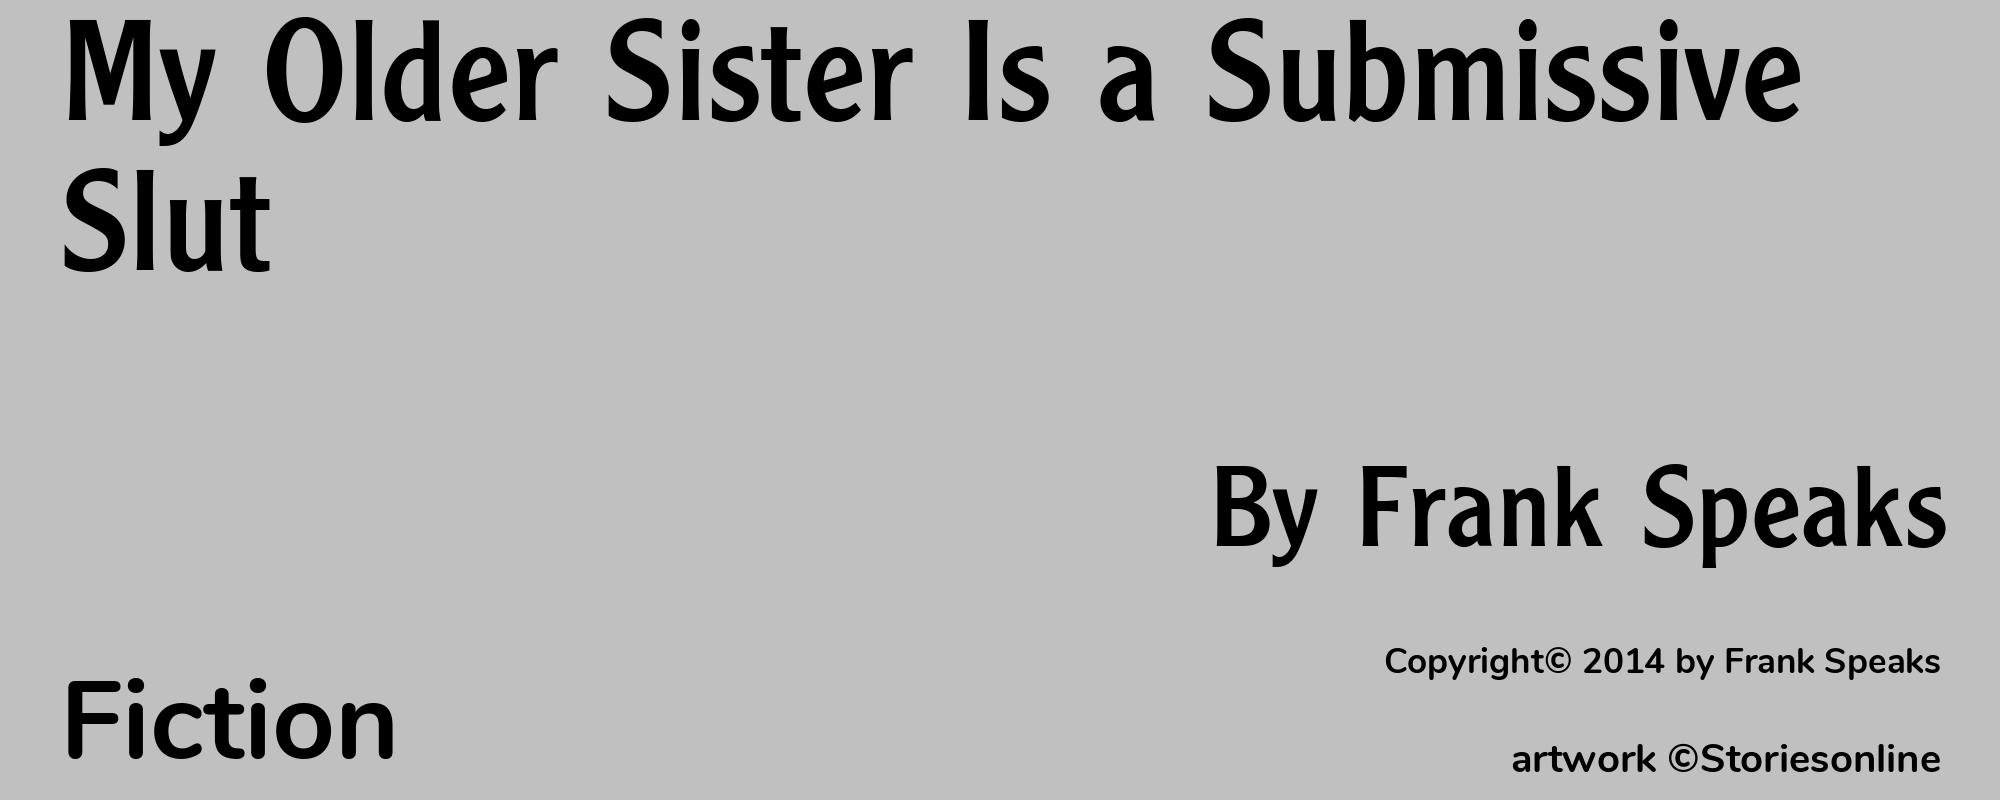 My Older Sister Is a Submissive Slut - Cover